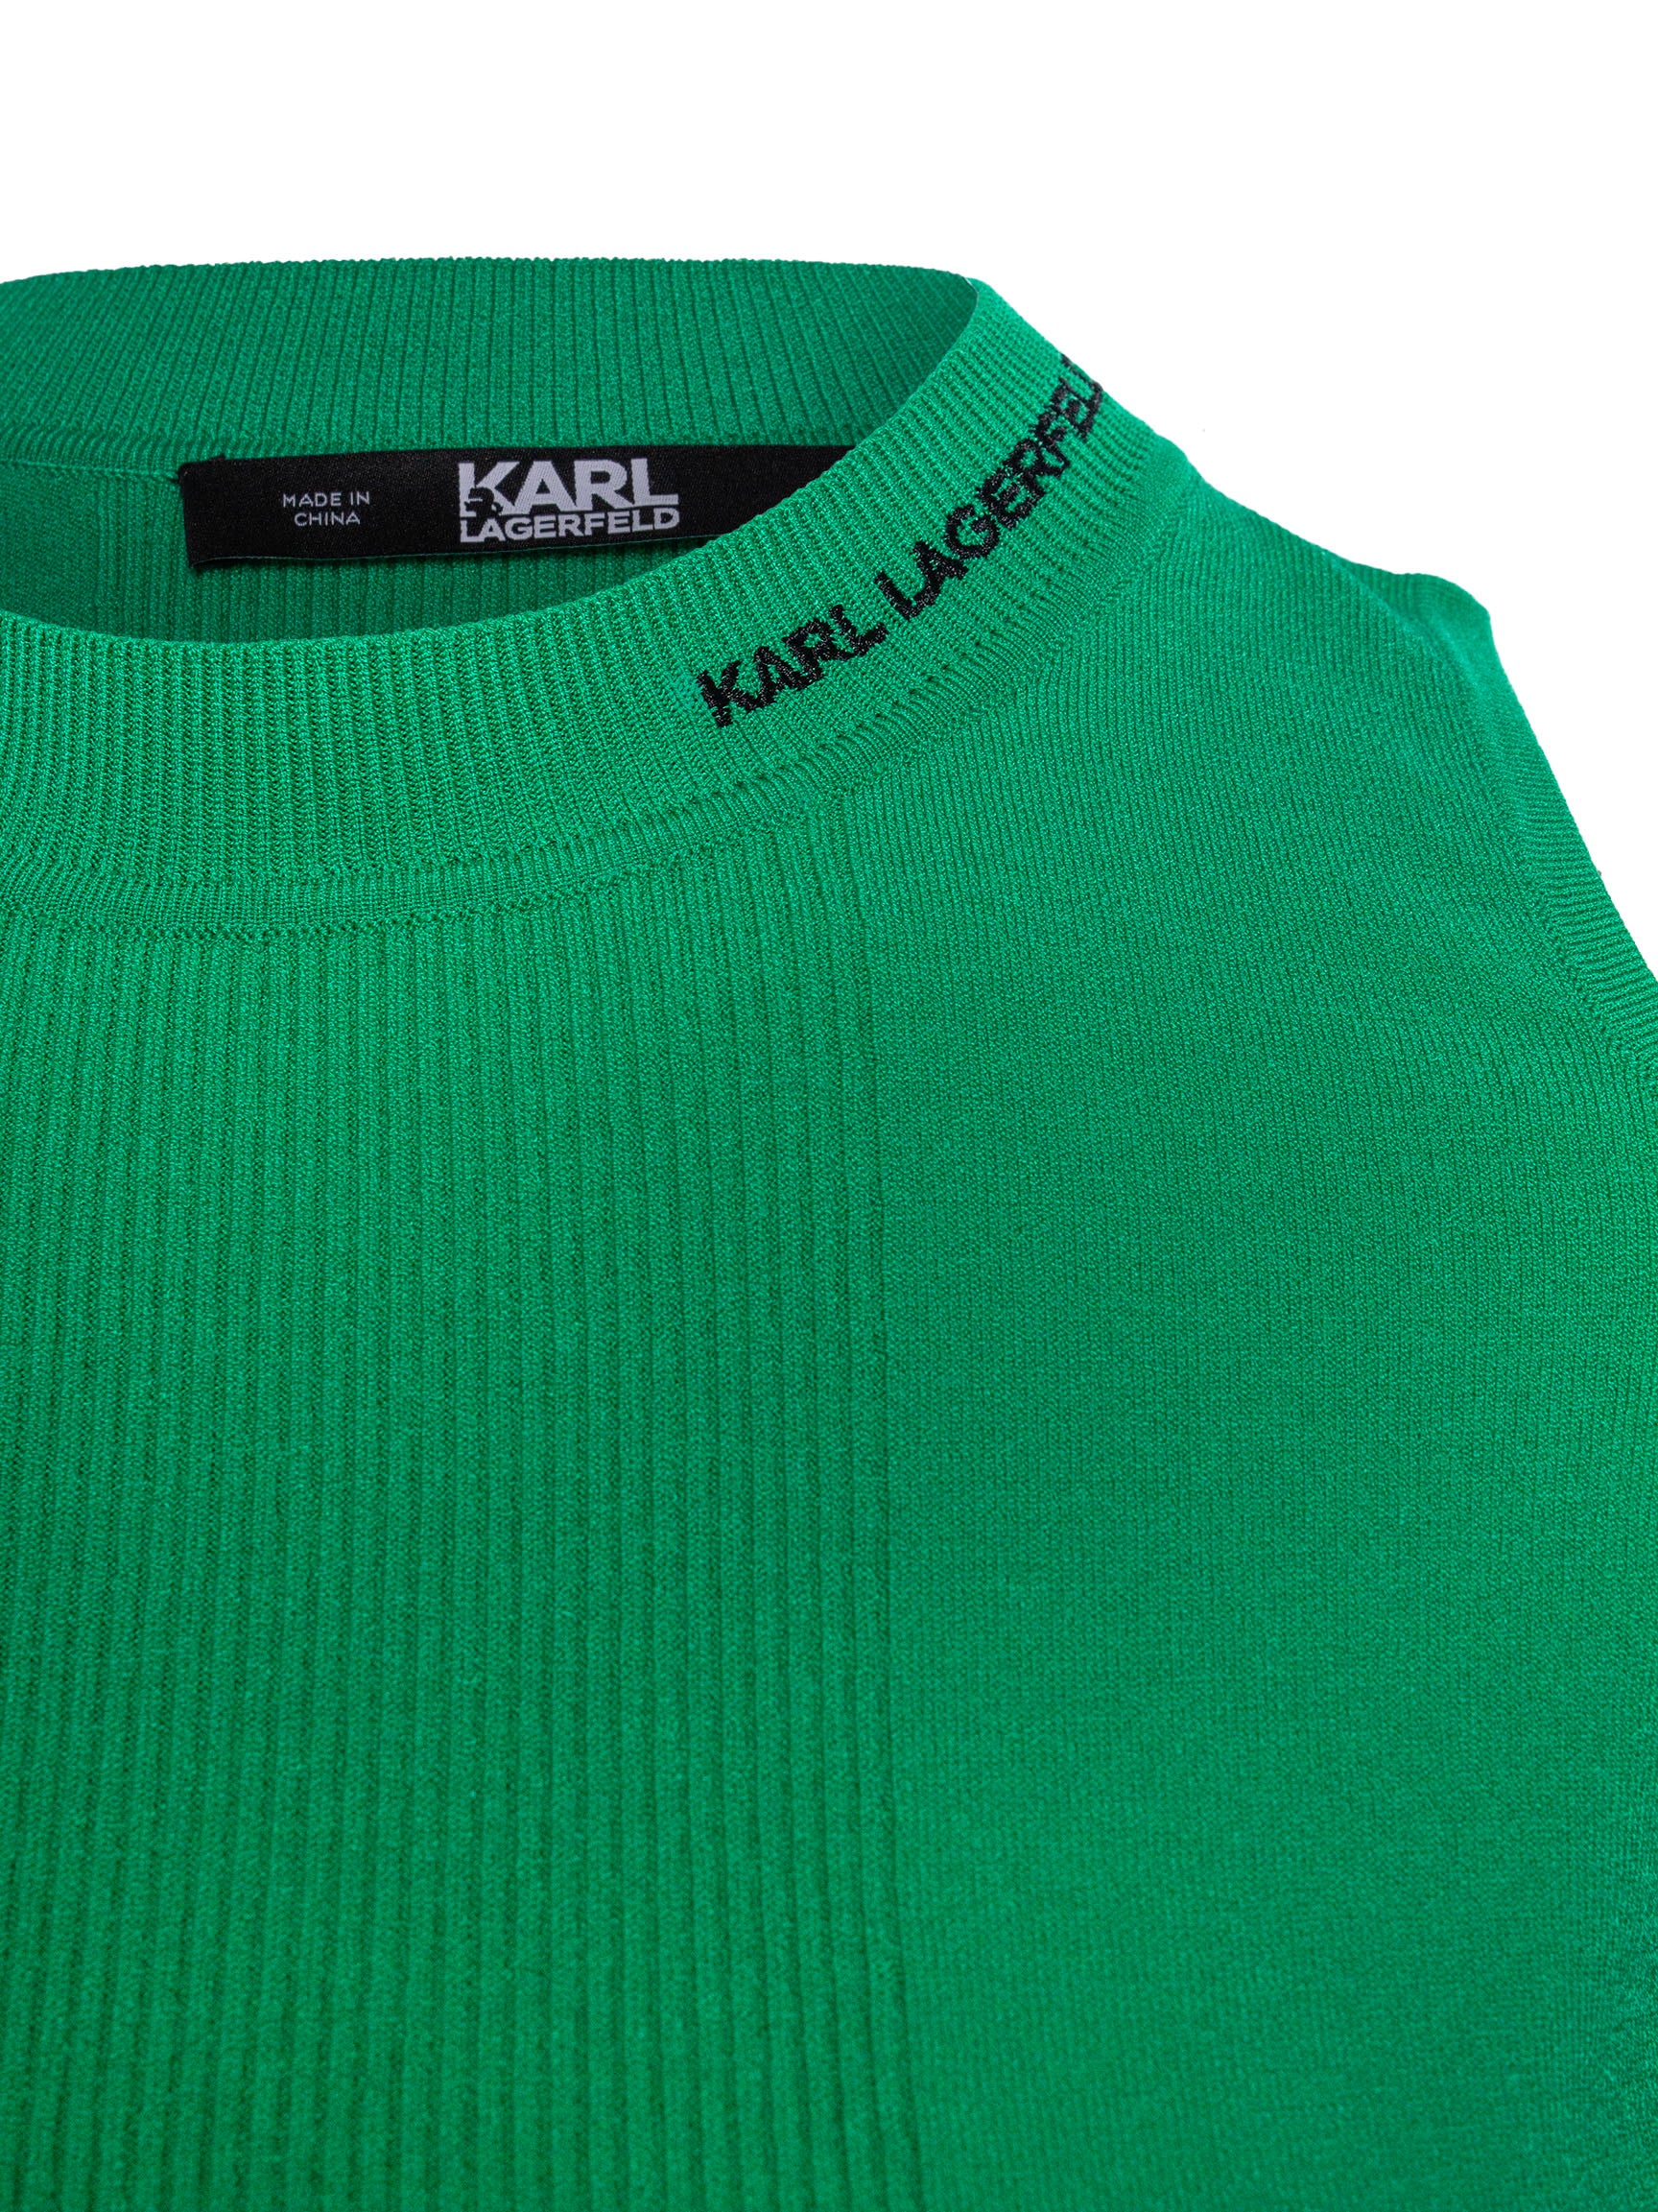 KARL LAGERFELD CUT-OUT KNITTED TOP